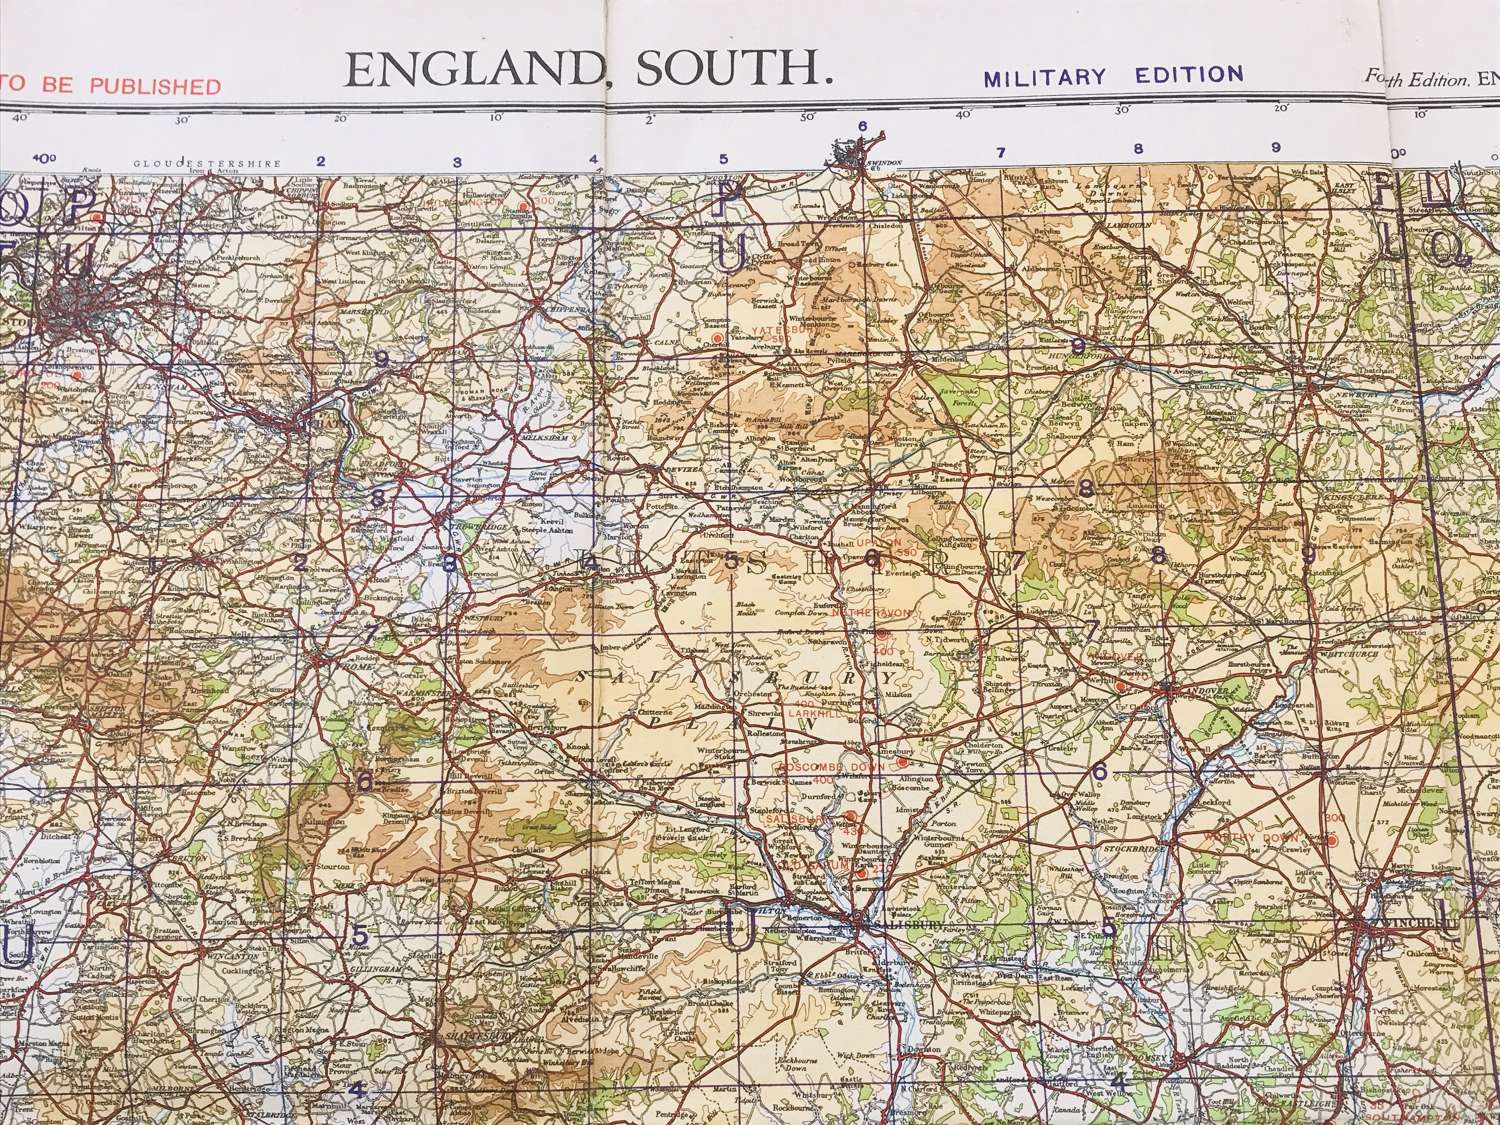 Map of south of England dated 1940